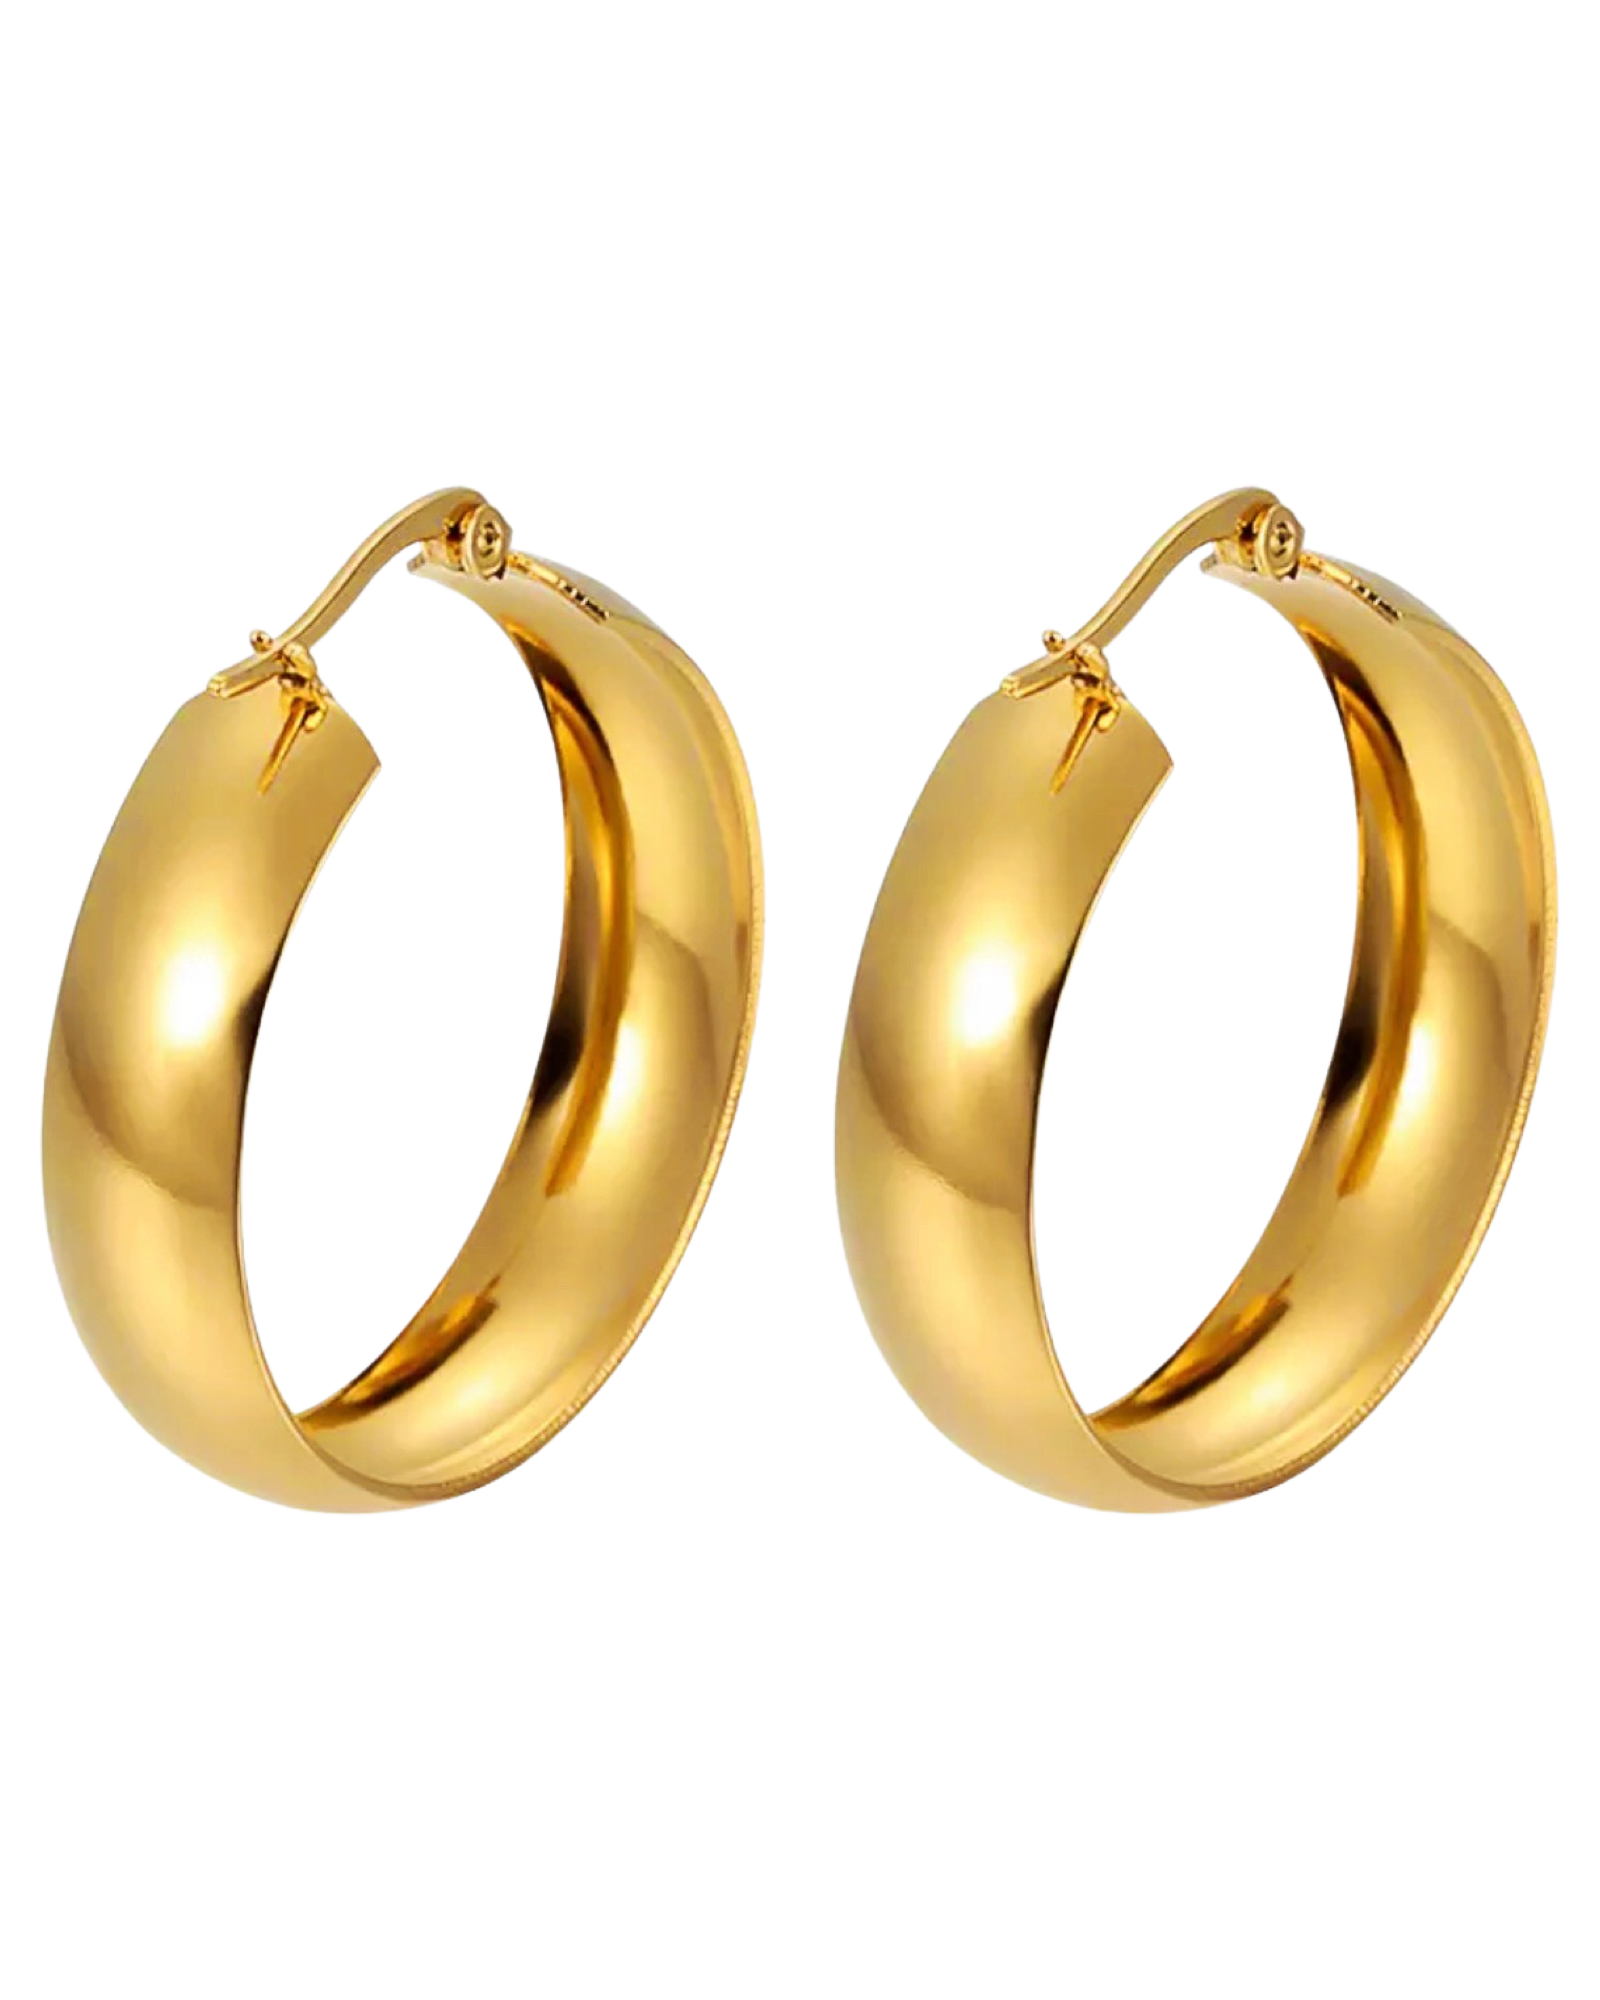 30mm Gorgeous Gorgeous Girls Hoops (18k Gold)